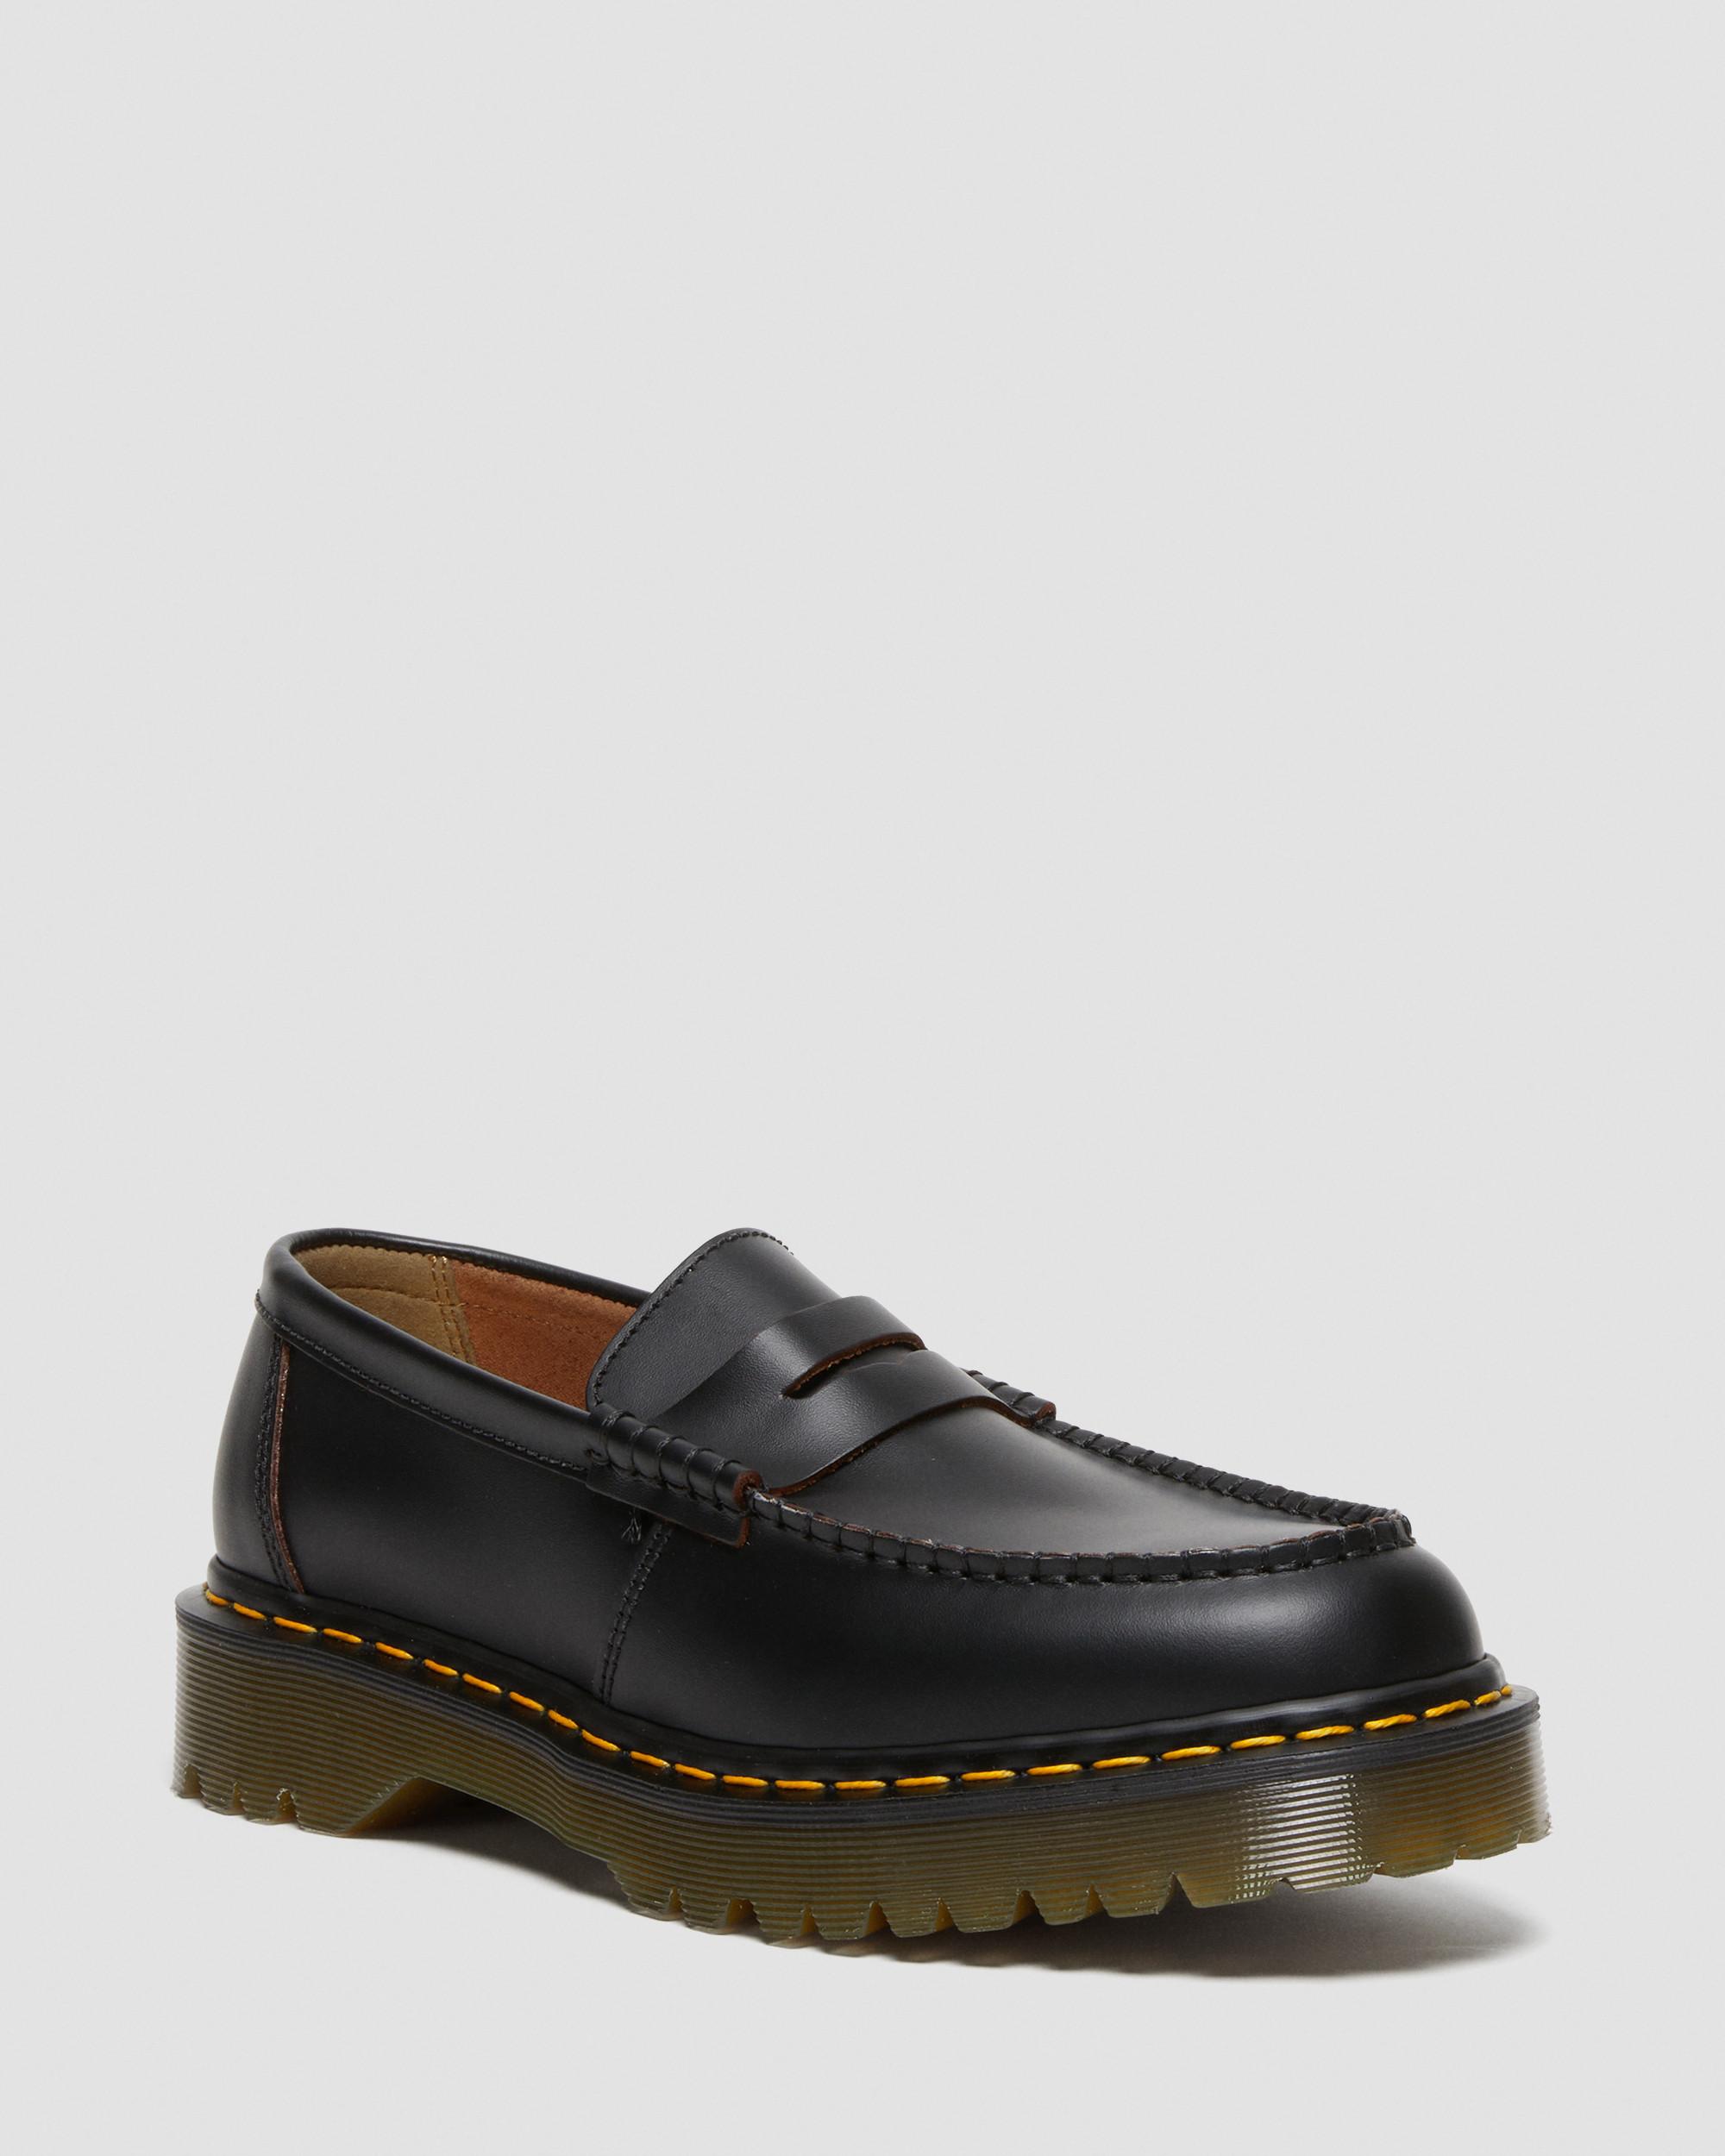 Penton Bex Made in England Quilon Leather Loafers in Black